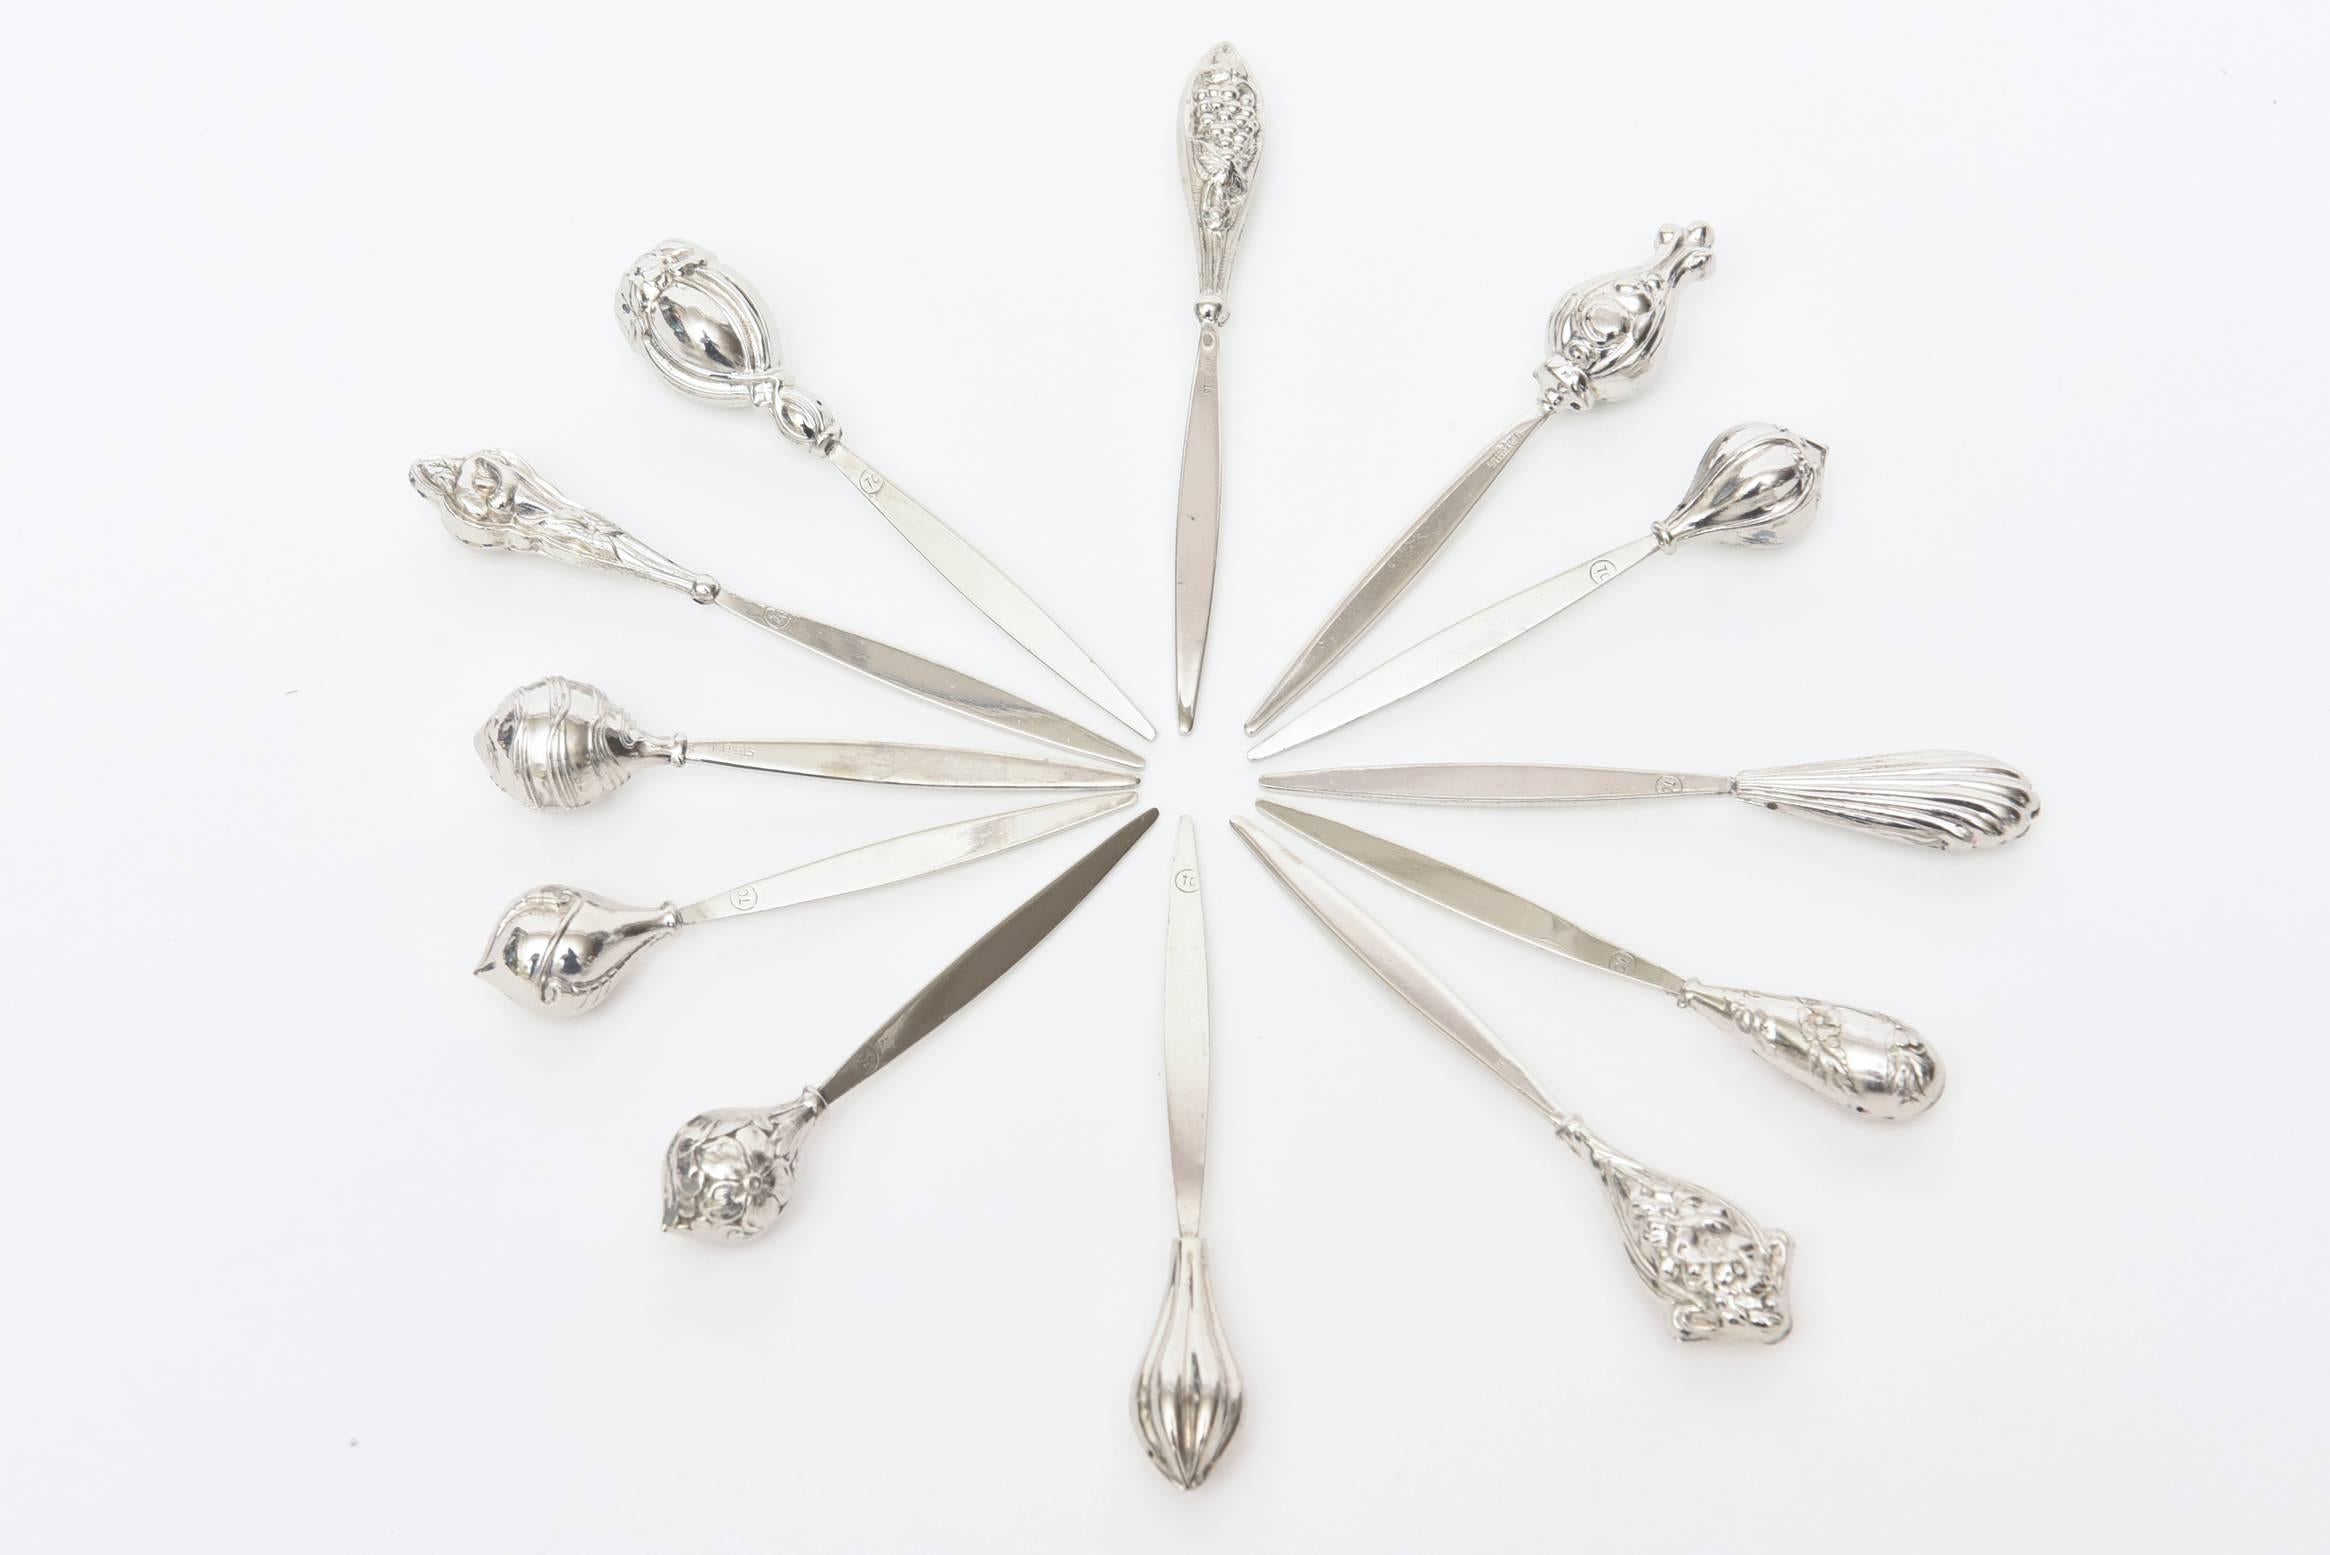 These wonderful polished sterling silver marked serving picks can be used for anything. They would be great for hor d'oeuvres.
They are from the late 1950s, early 1960s. Their heads have a classical and different design to theme to them and look